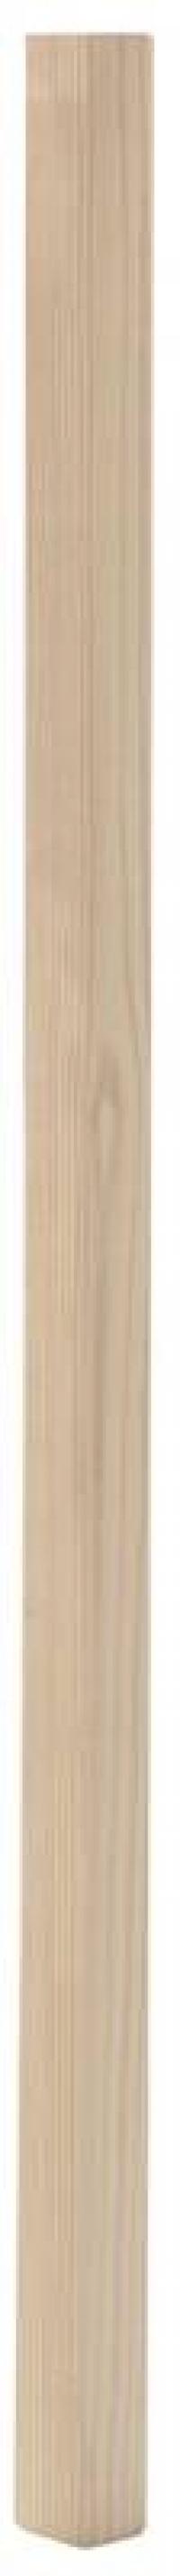 2X2-42" P/T BALUSTER CLEAR